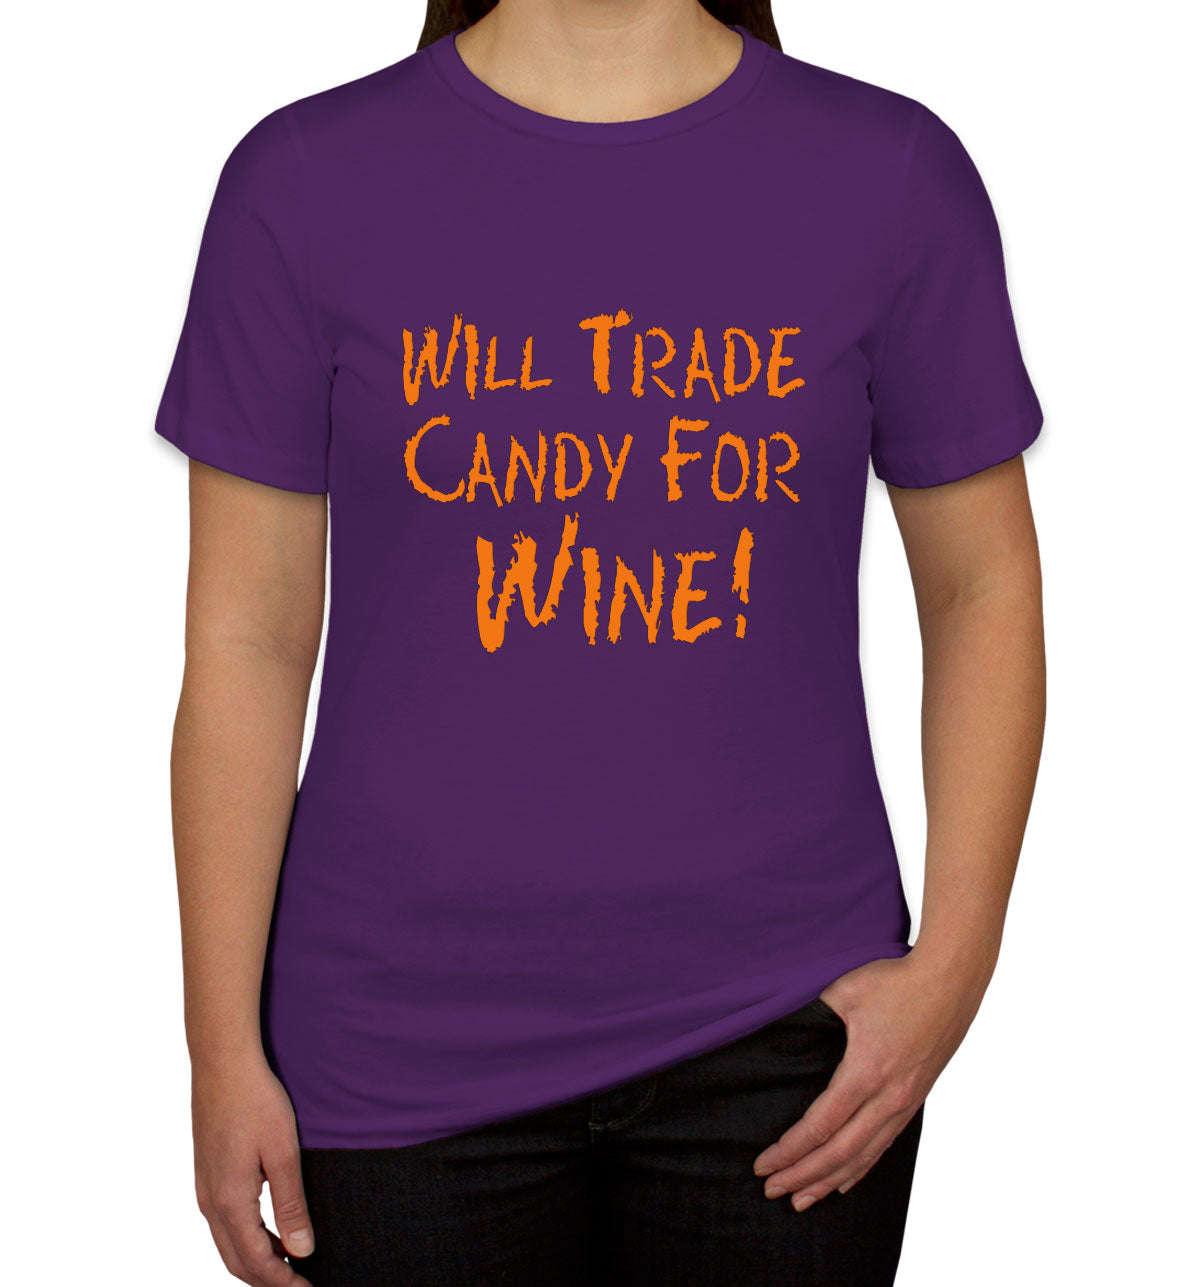 Will Trade Candy For Wine Women's T-shirt